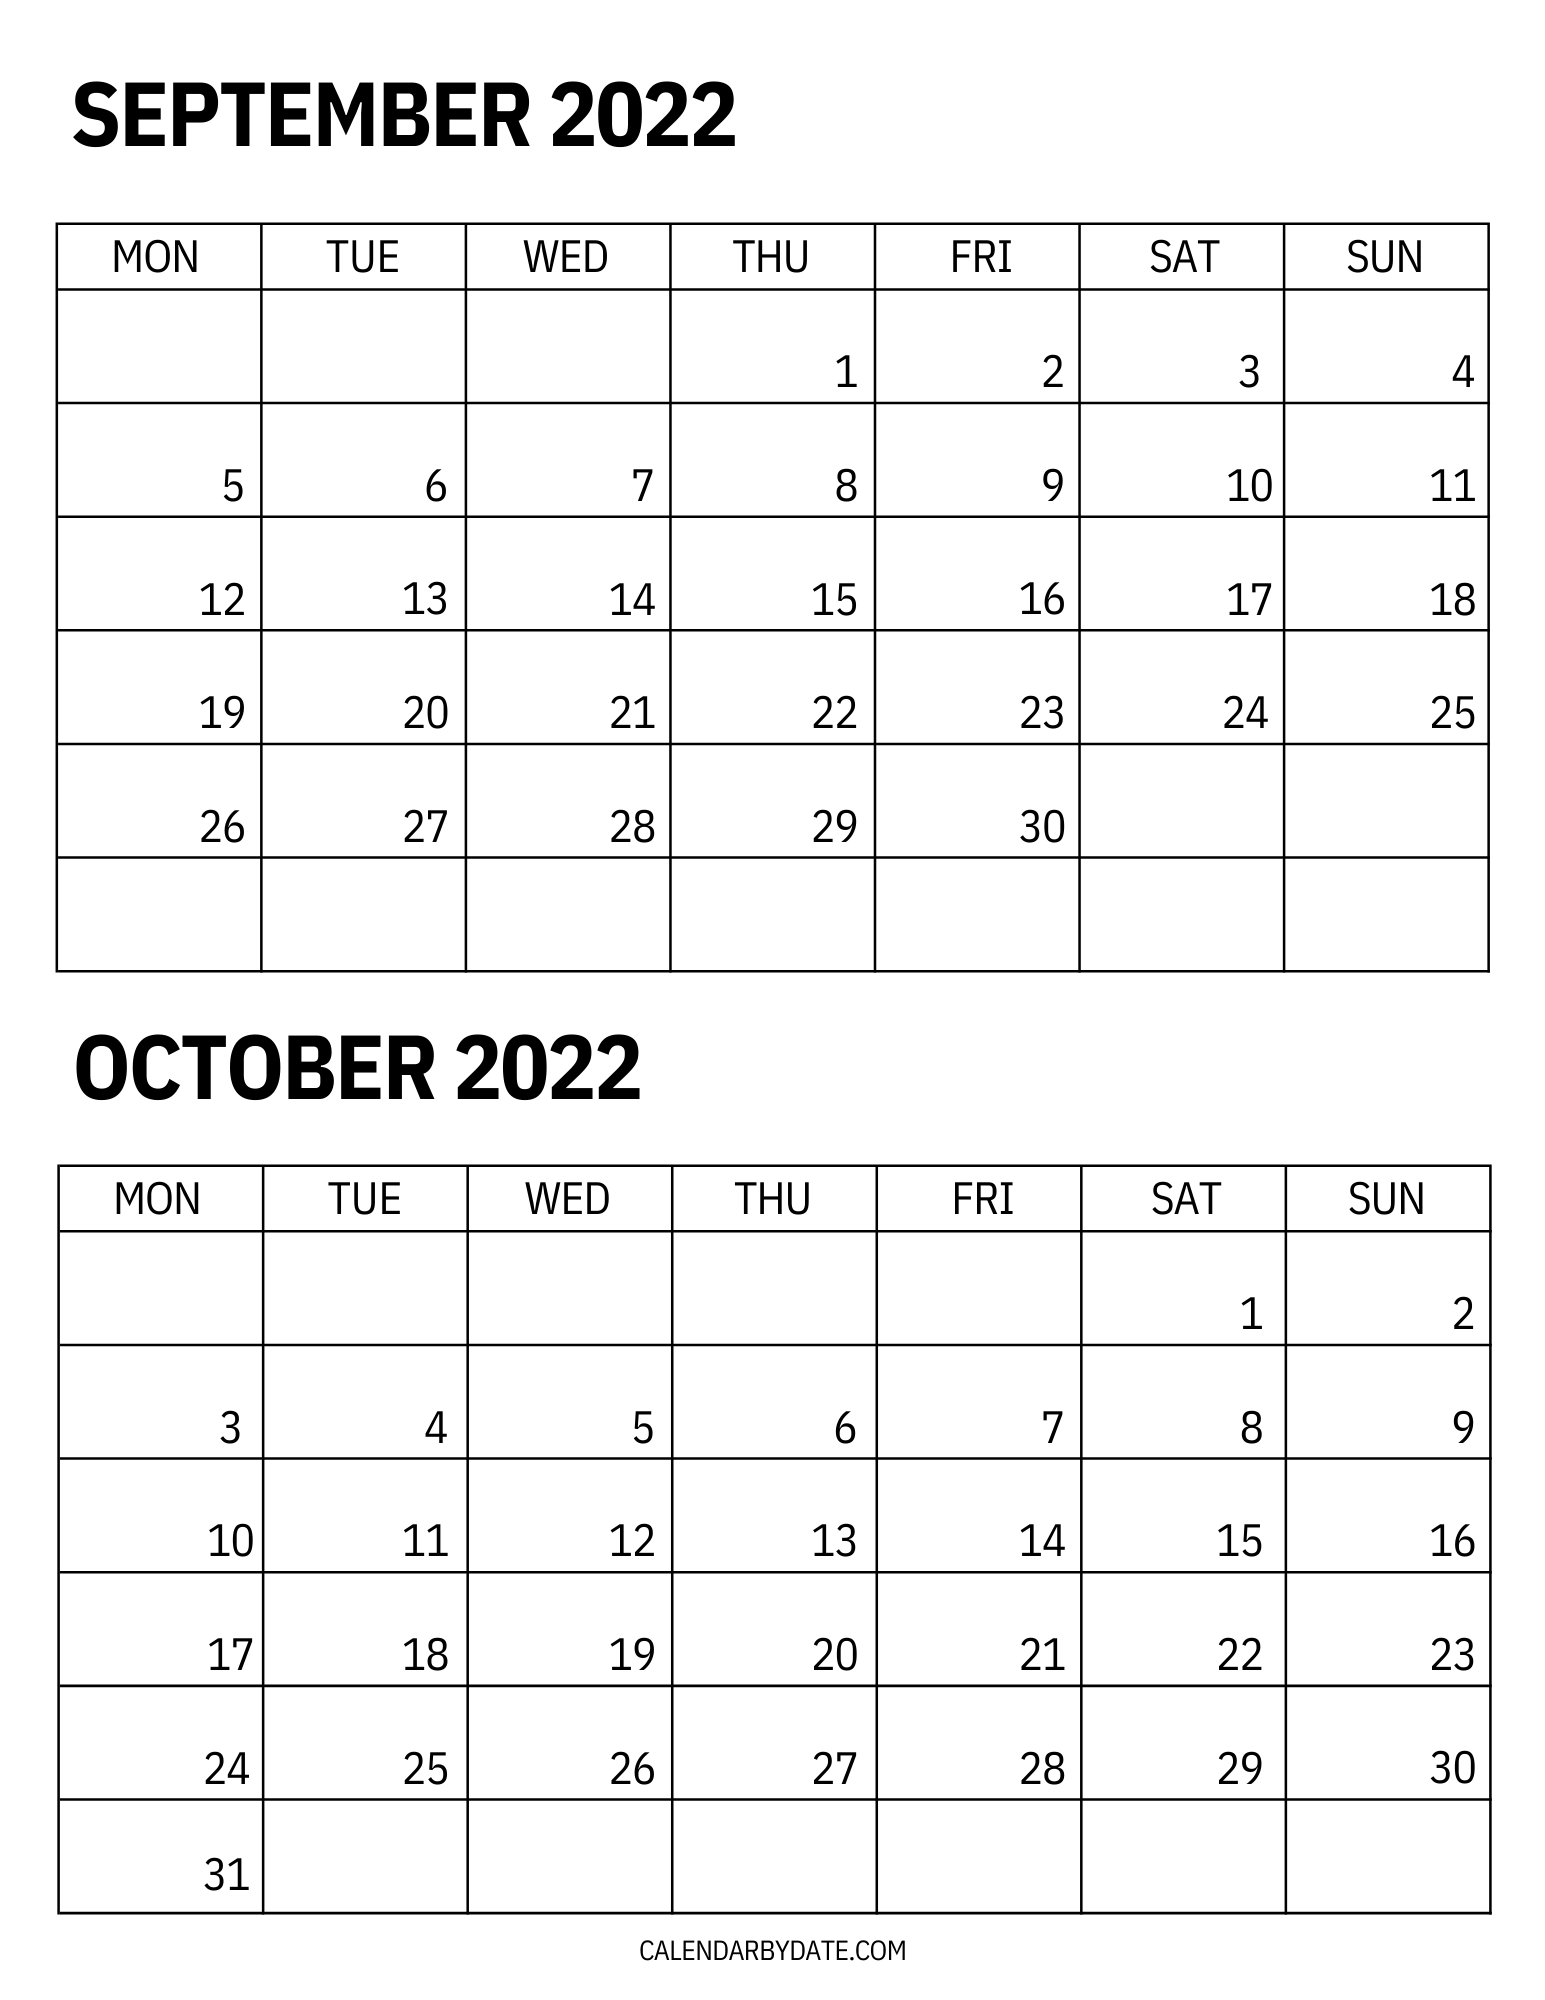 Two-month calendar for September and October 2022, with weekdays starting from Monday. The calendar is designed in a portrait format with bold monthly dates written in a grid.